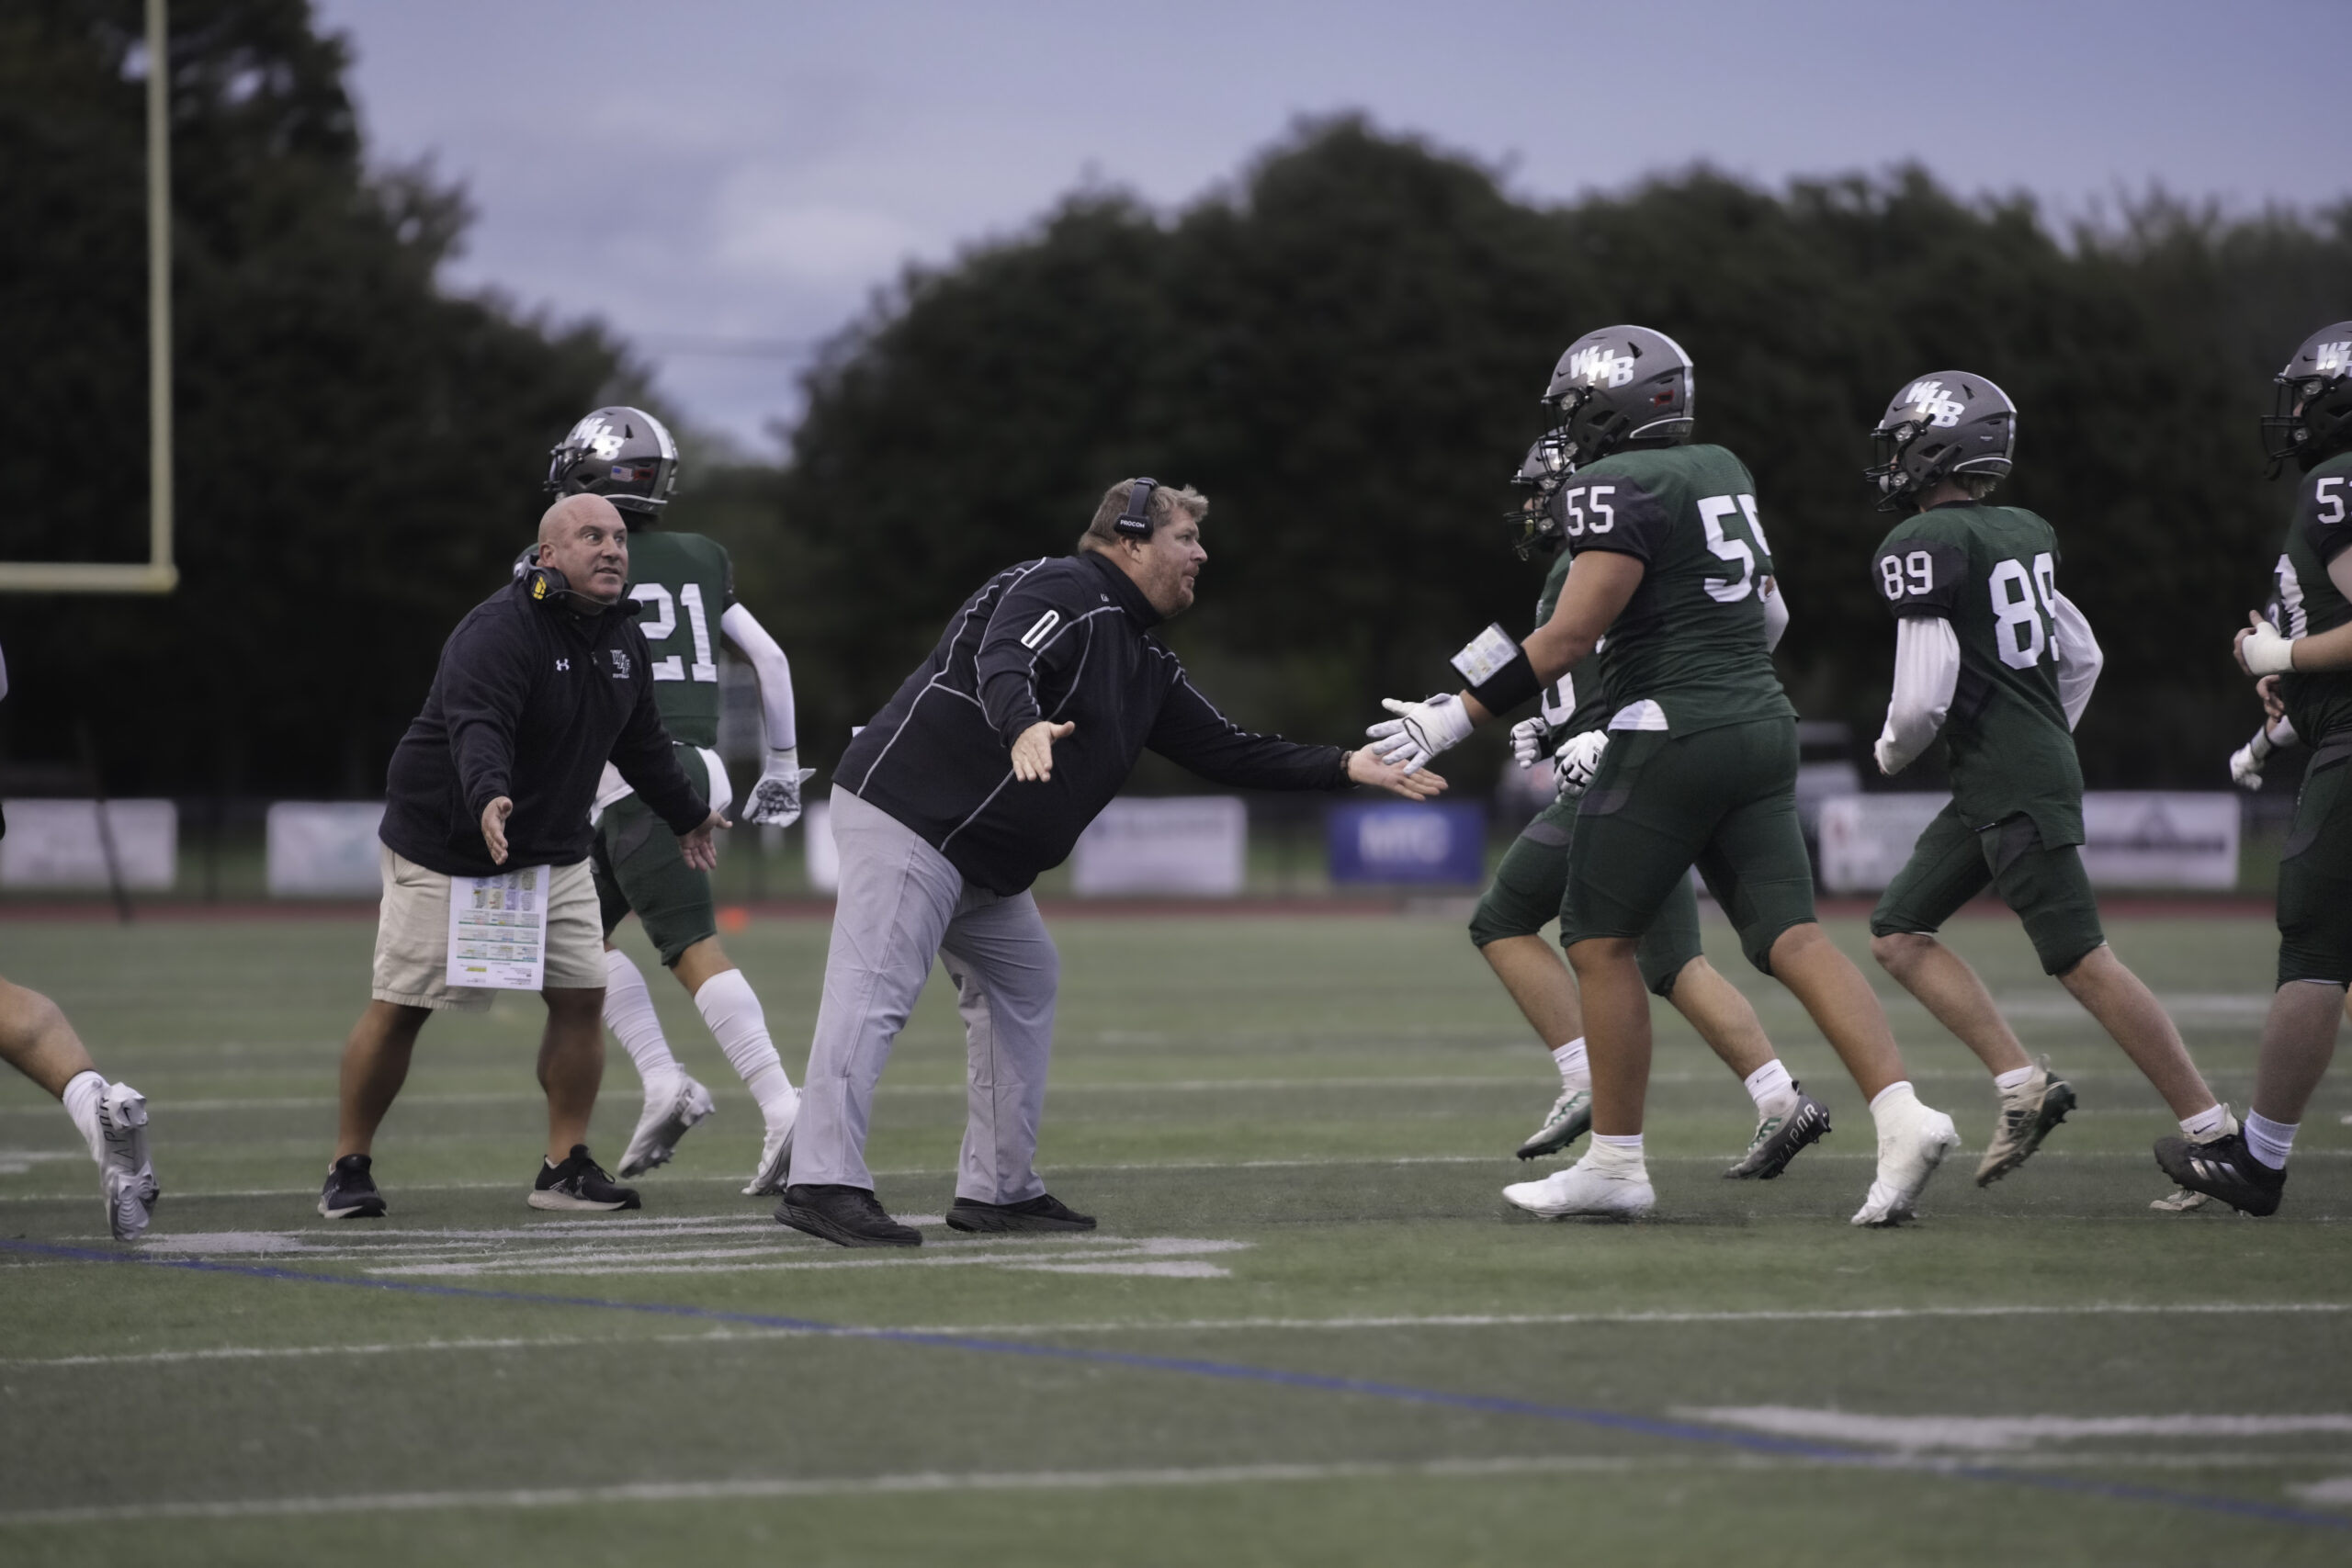 Storm Surge Hurricanes Score Early and Often in Rout of Islip 27 East